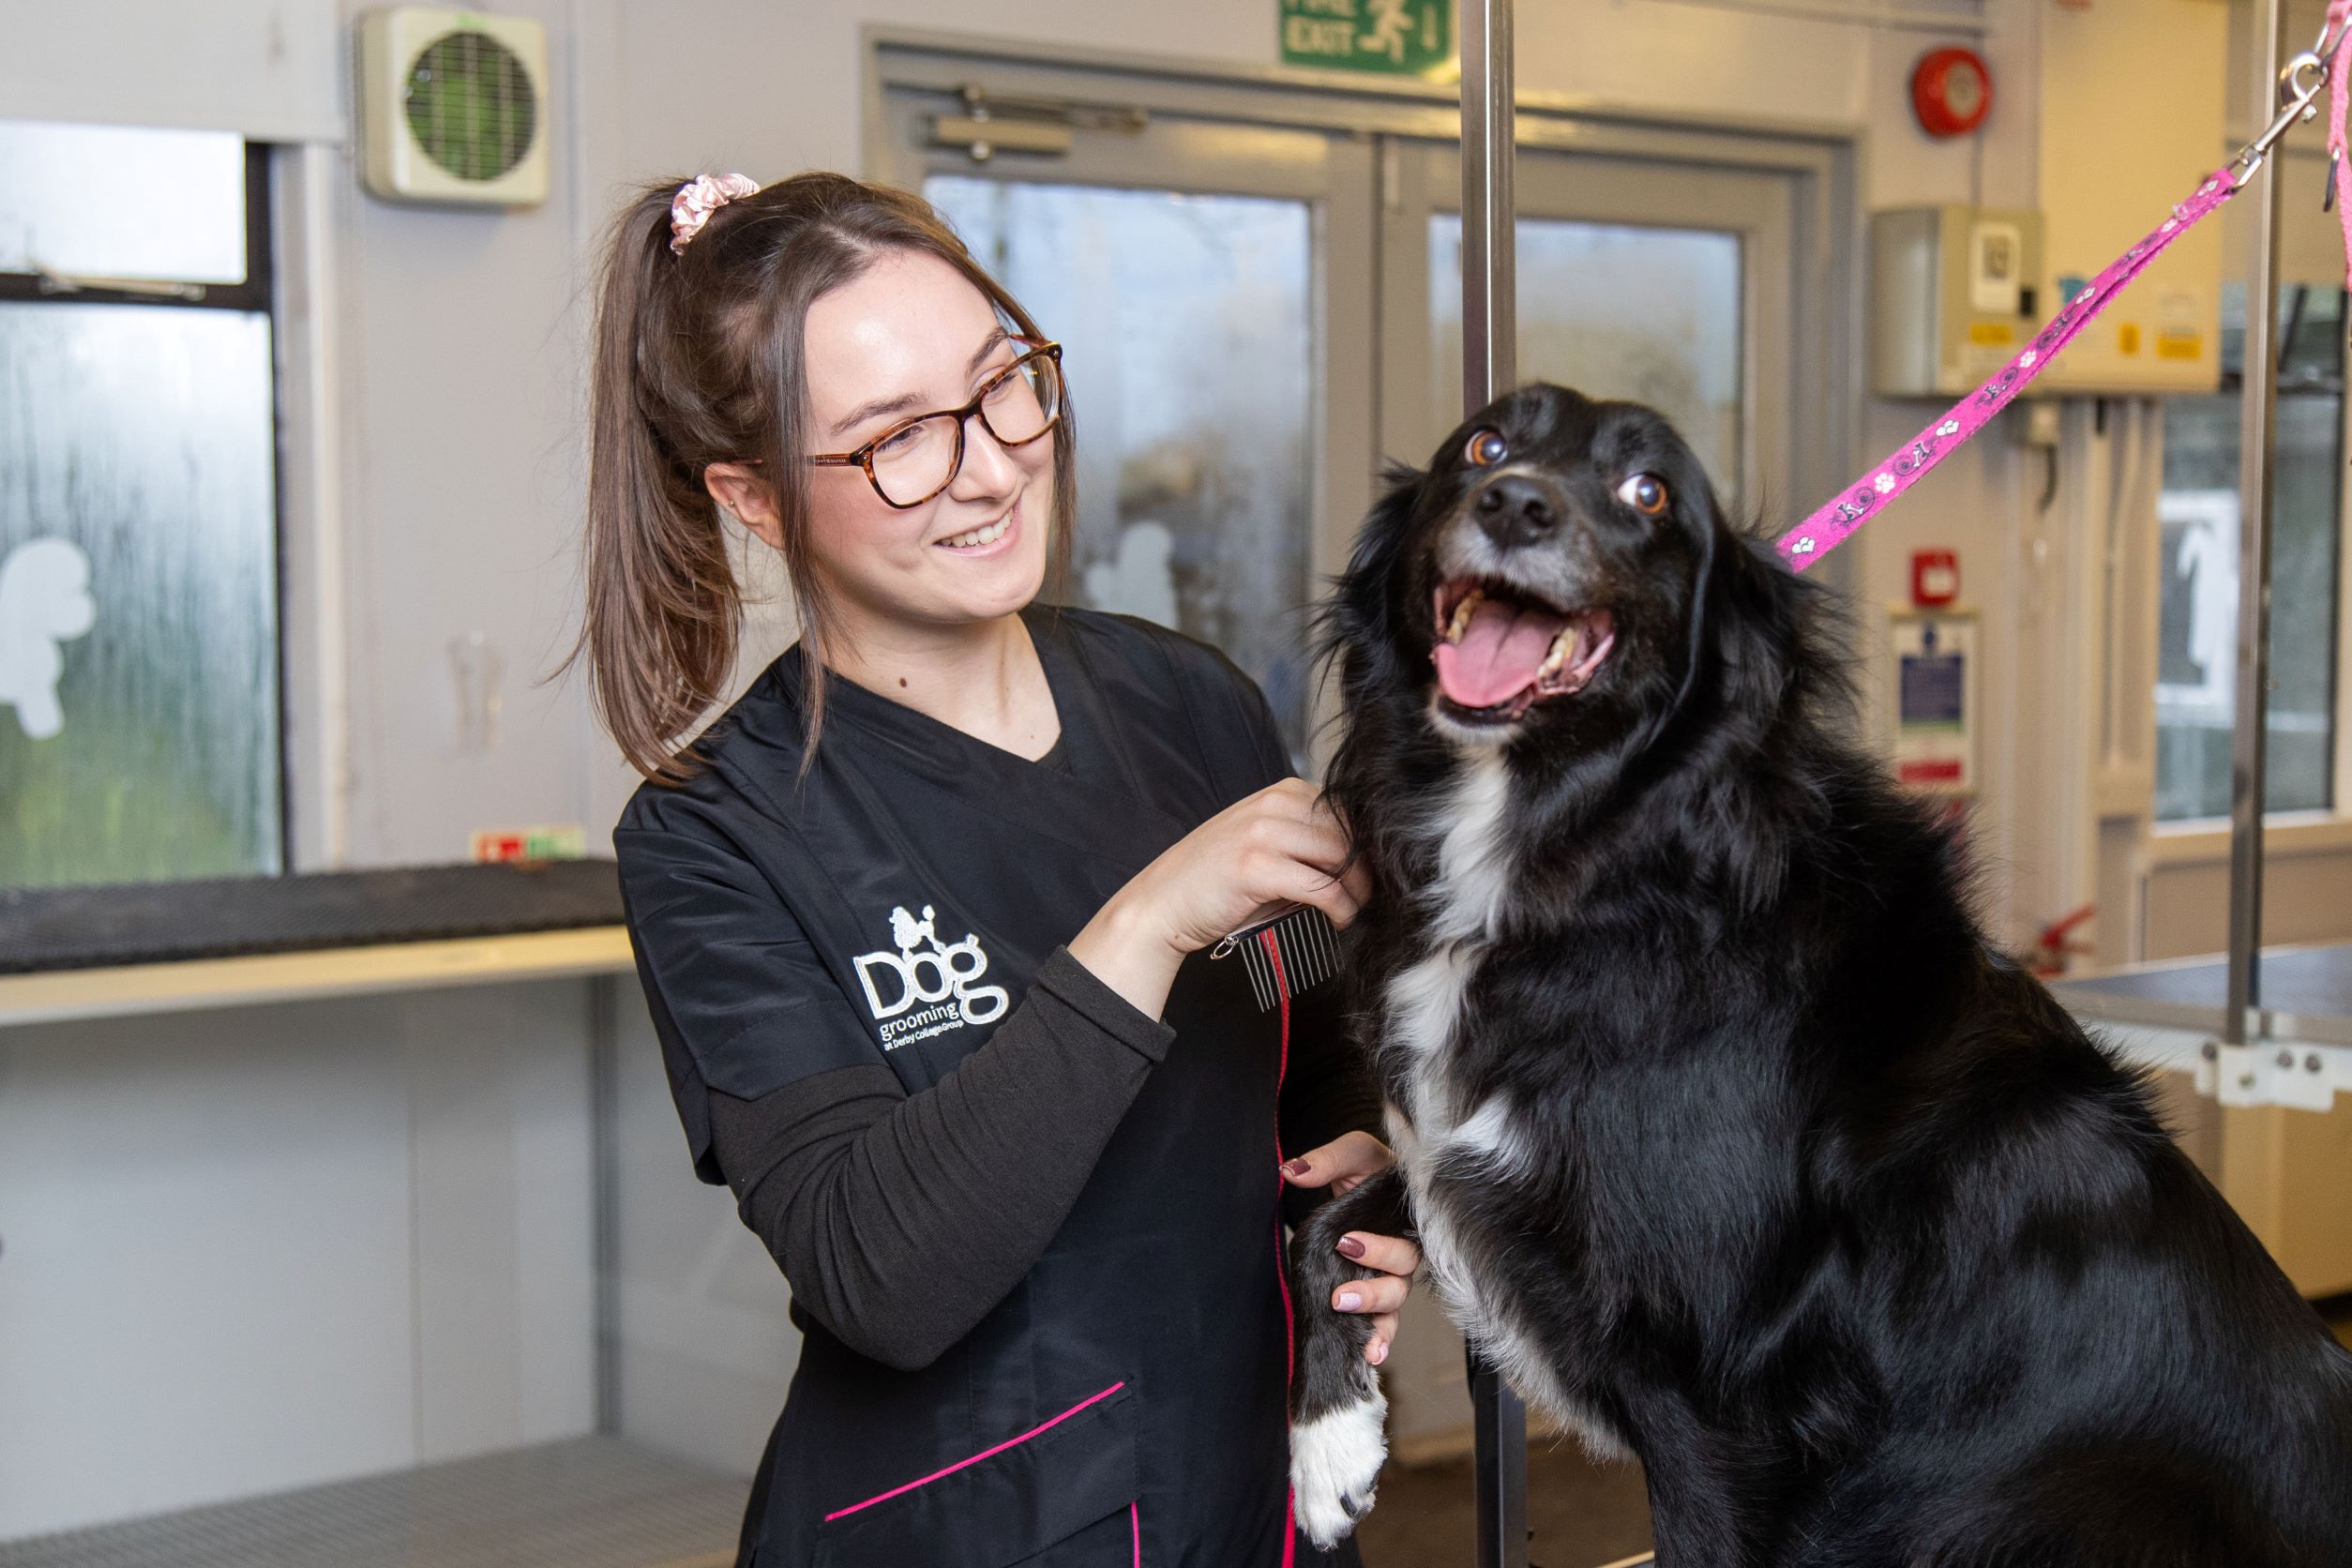 Dog grooming student with a happy dog.